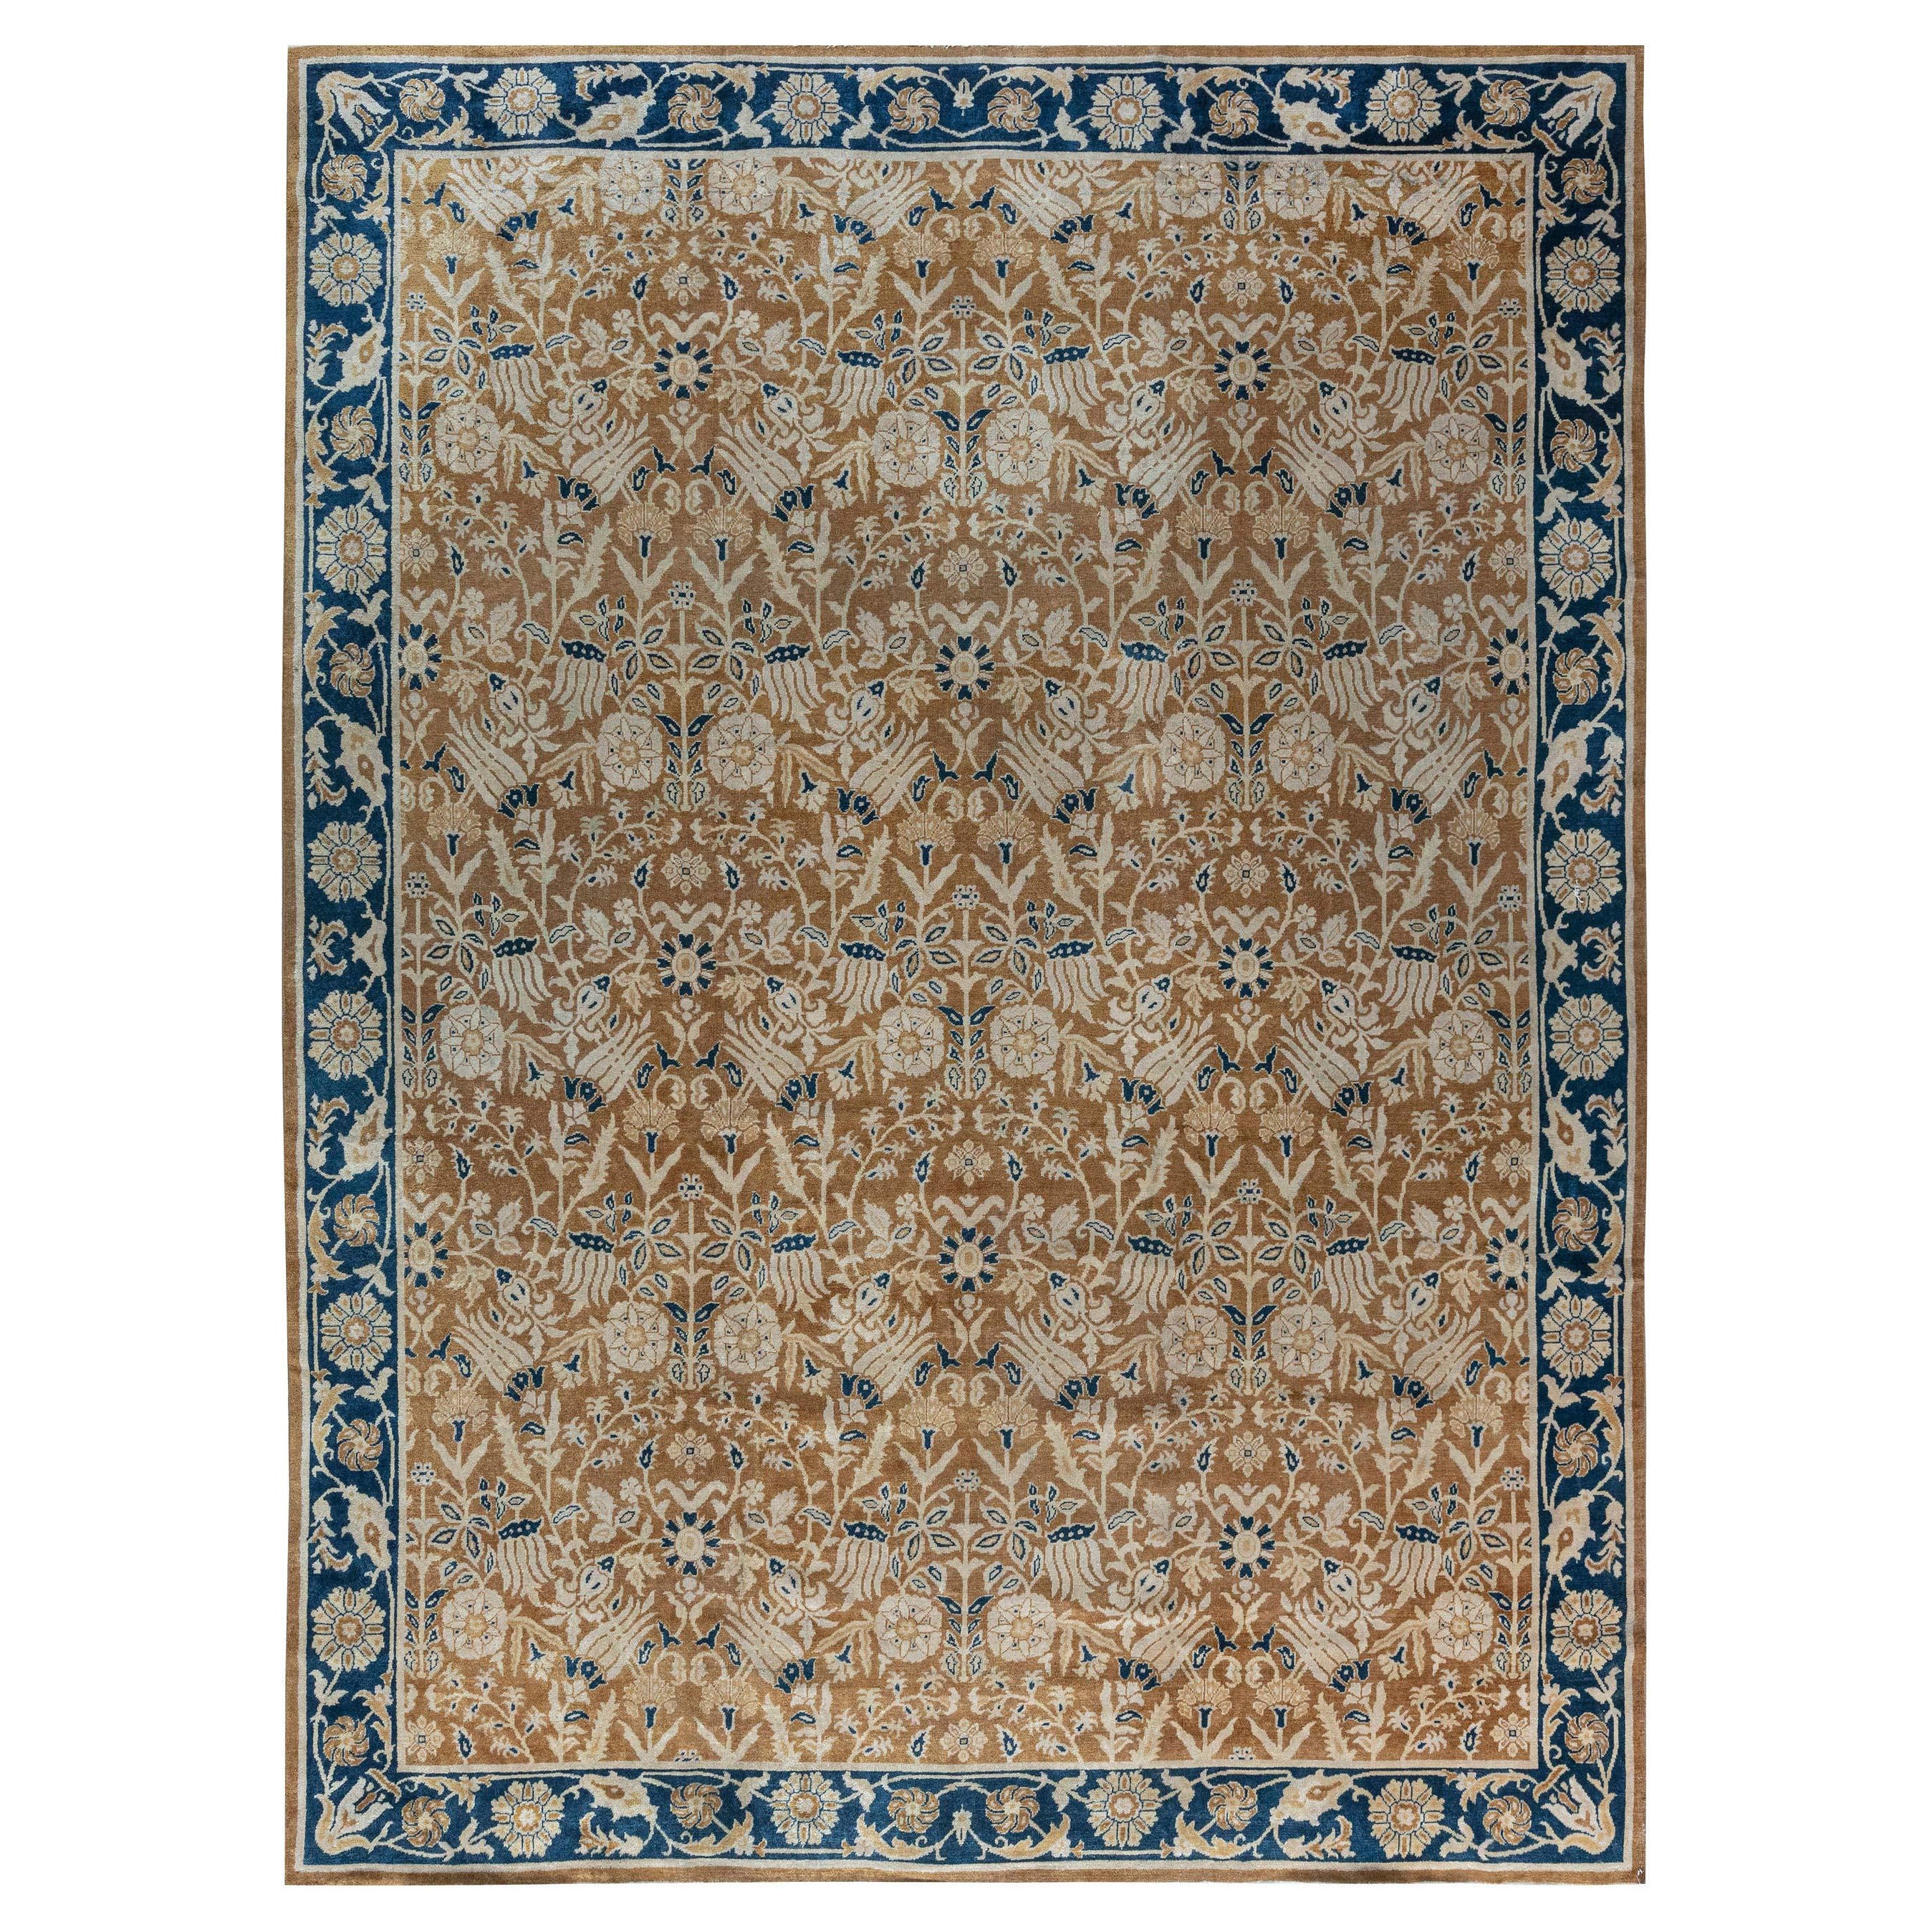 Early 20th Century Floral Indian Rug